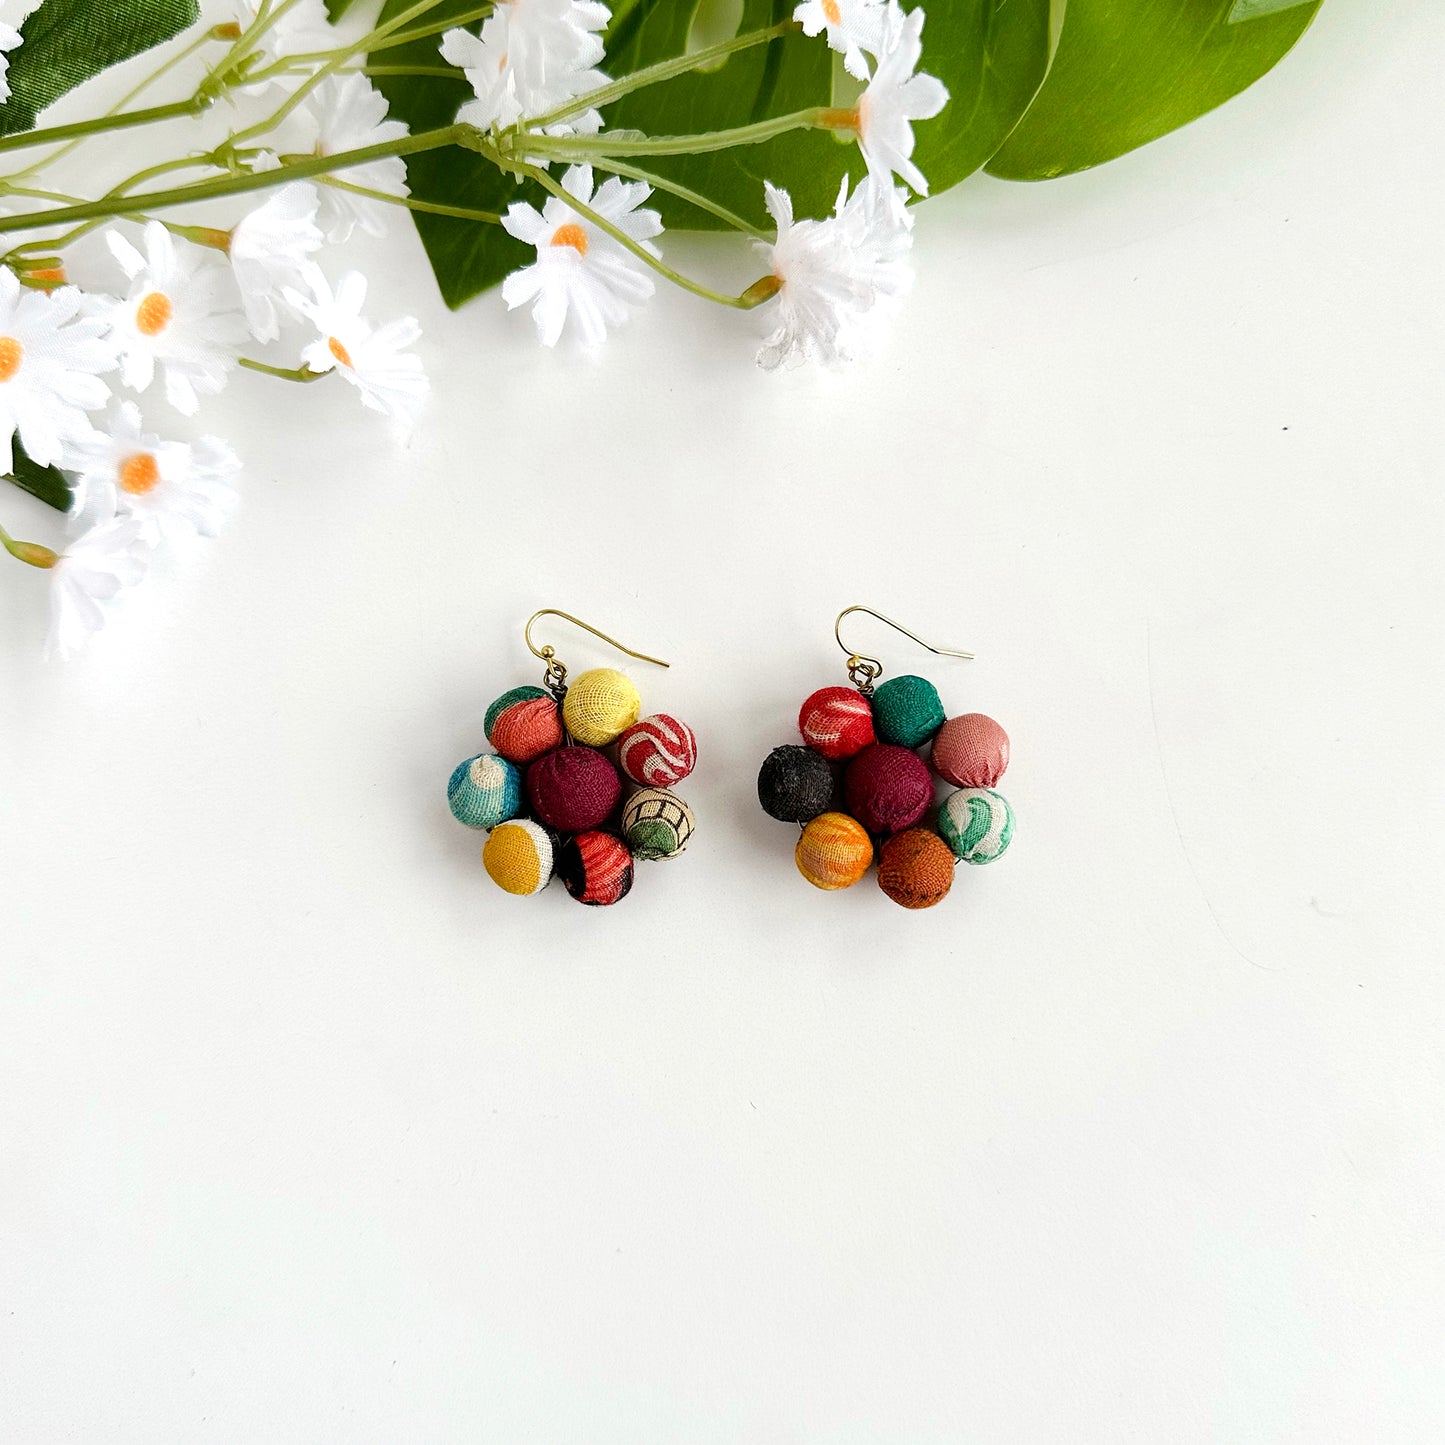 A pair of earrings is shown. These earrings are formed in the shape of a flower with a textile-wrapped bead in the center surrounded by seven smaller textile-wrapped beads acting as petals.